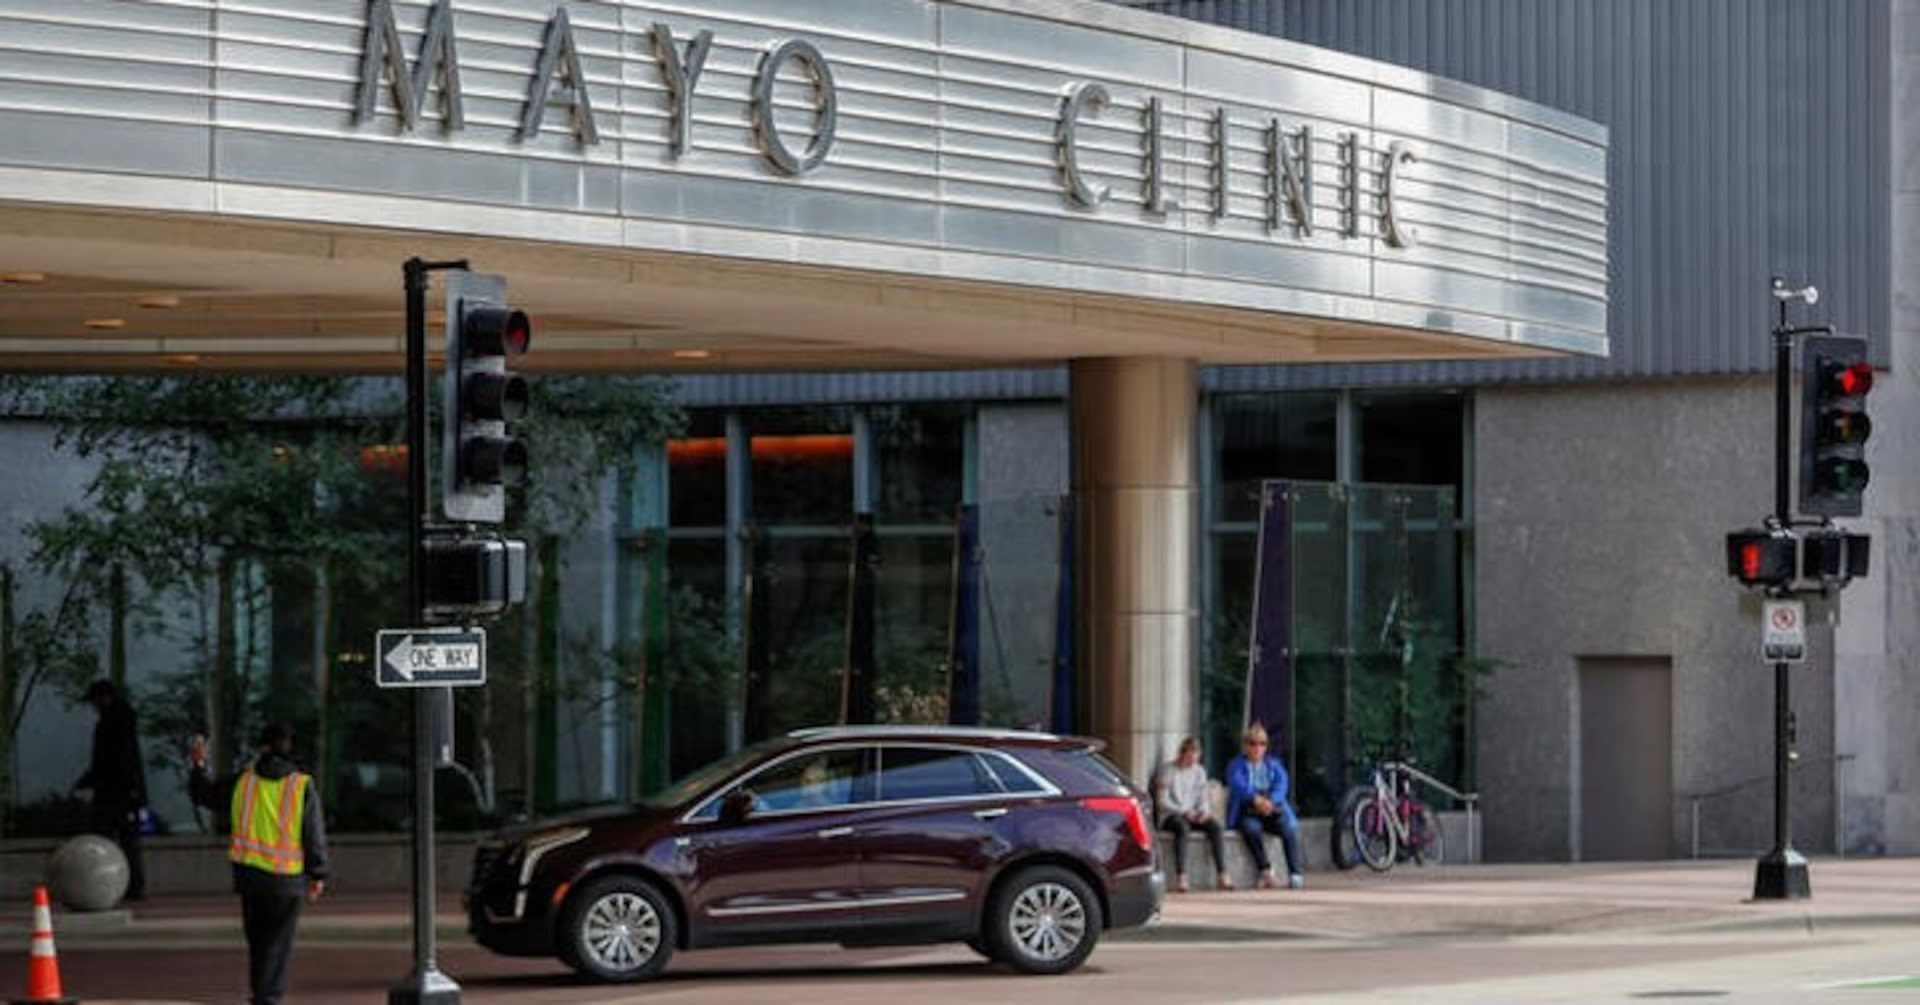 Mayo Clinic must face religious bias claims over COVID vaccine policy, court rules